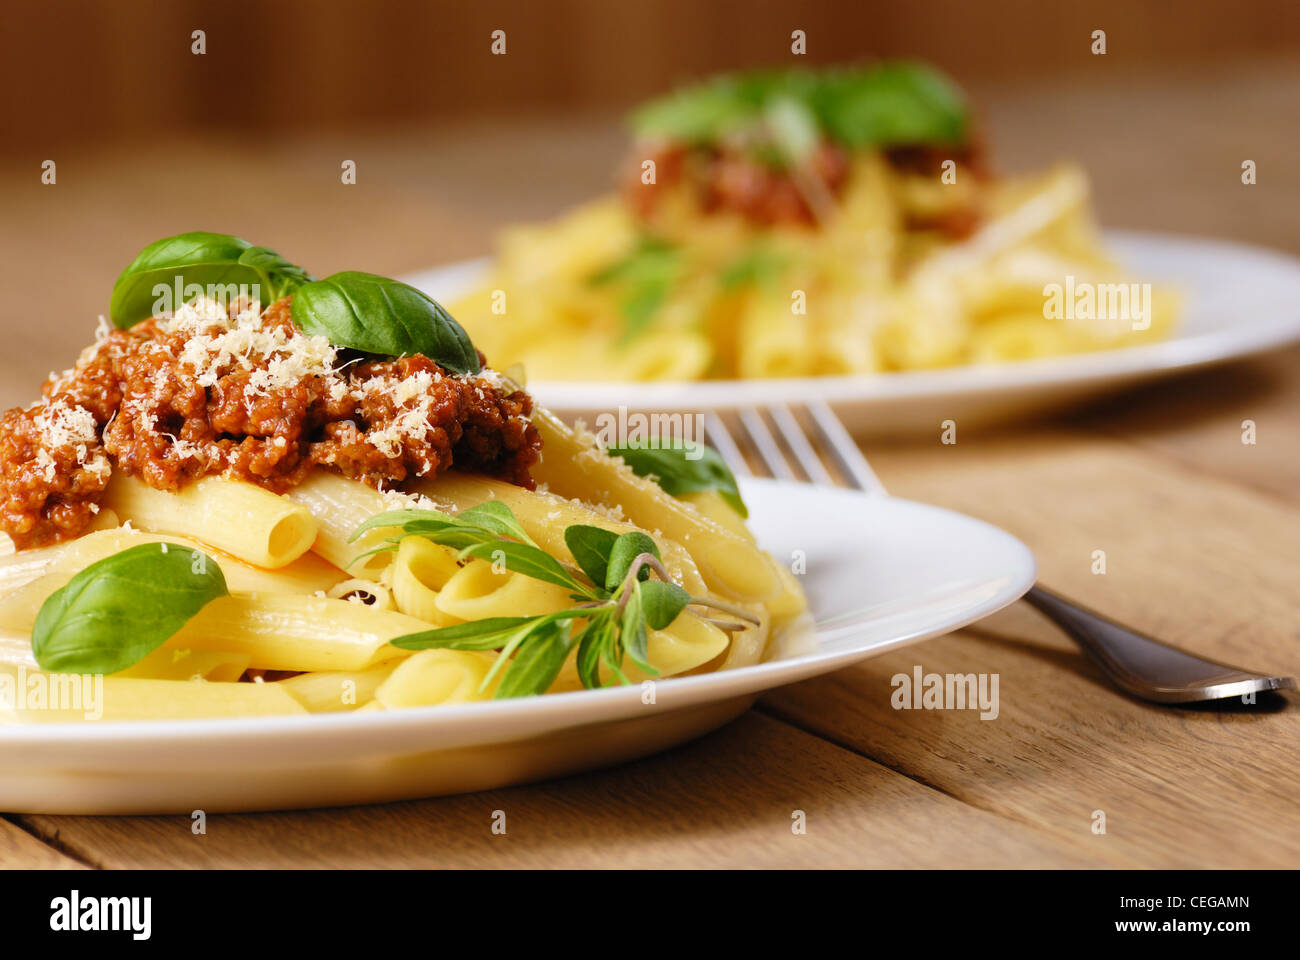 Rigatoni pasta with a tomato beef sauce in the white plate Stock Photo